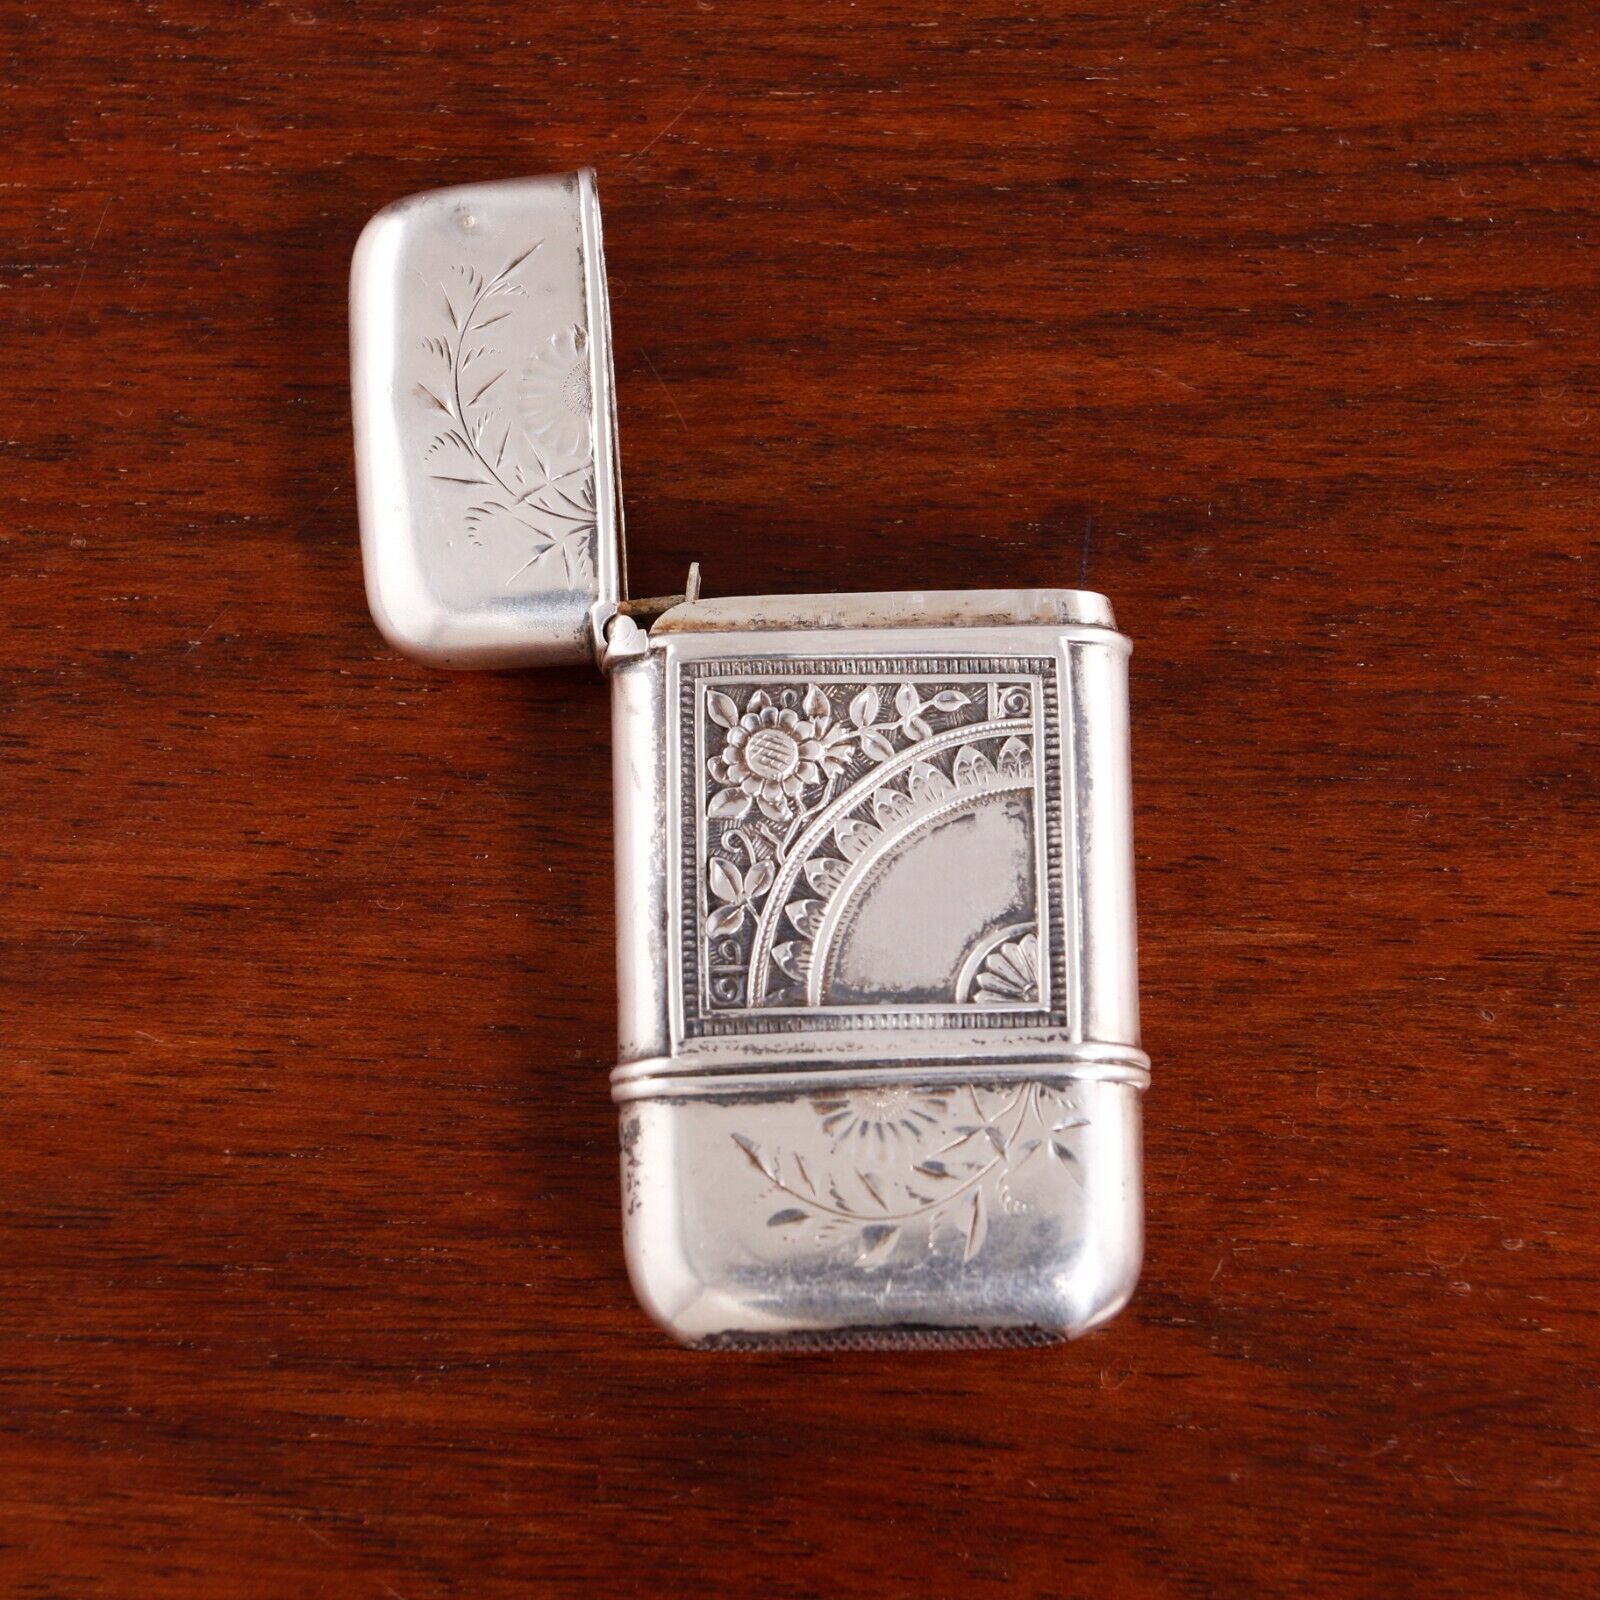 WHITING AESTHETIC STERLING SILVER MATCH SAFE FLORALS, FOLIATED NO MONOGRAM